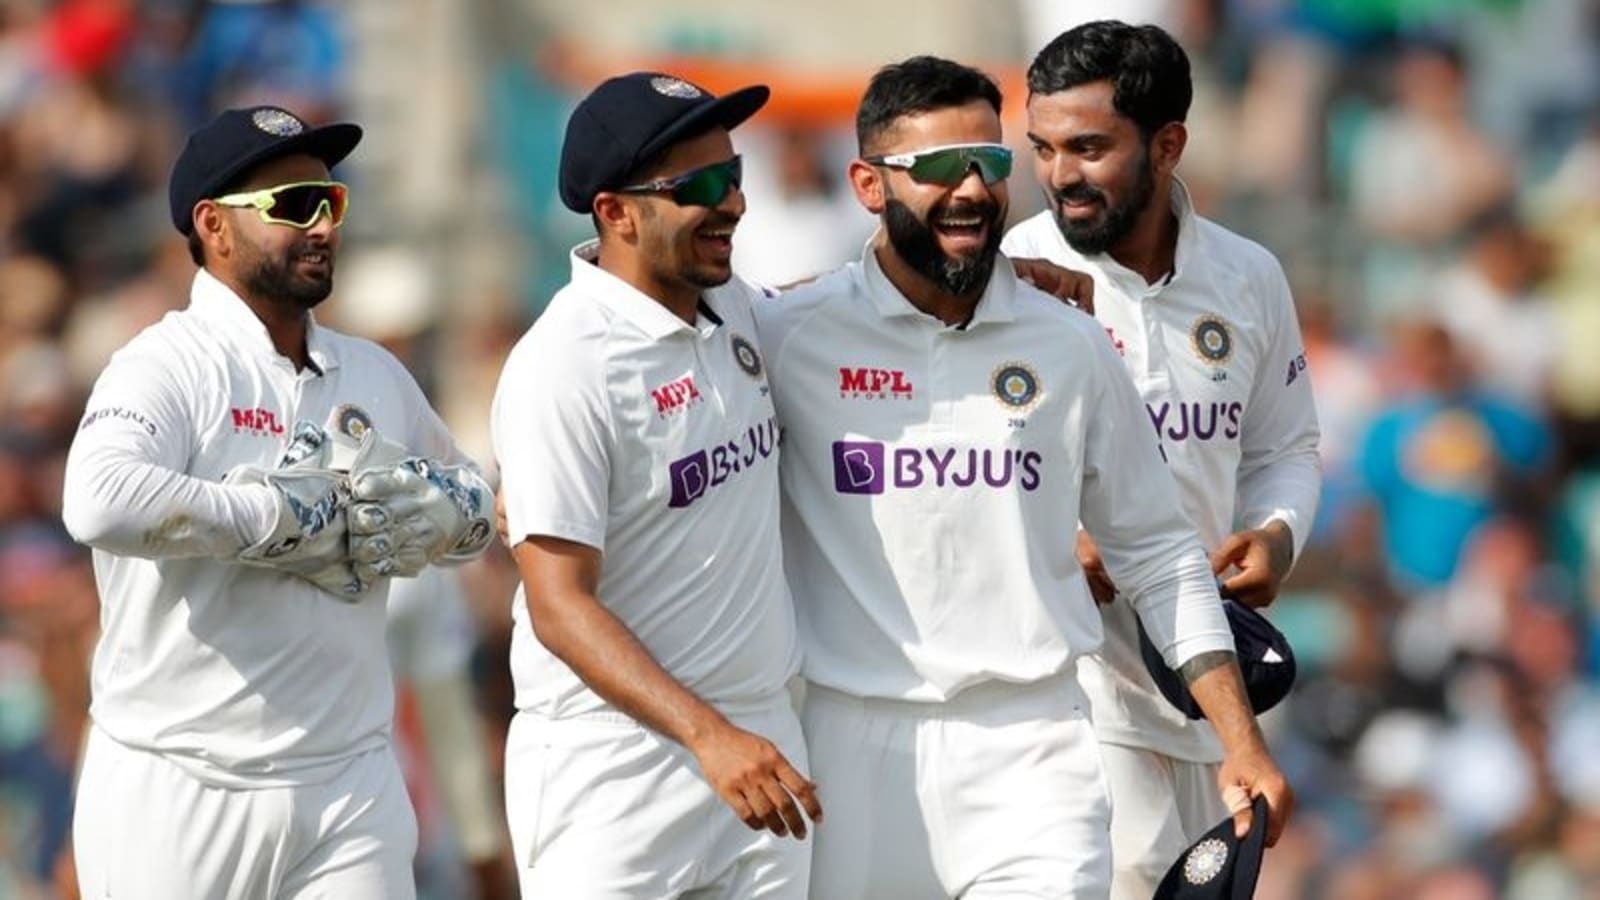 India Tour of England: Joe Root & Ben Stokes send BIG WARNING to Rohit Sharma & Co ahead of India '5th Test': Check WHY?